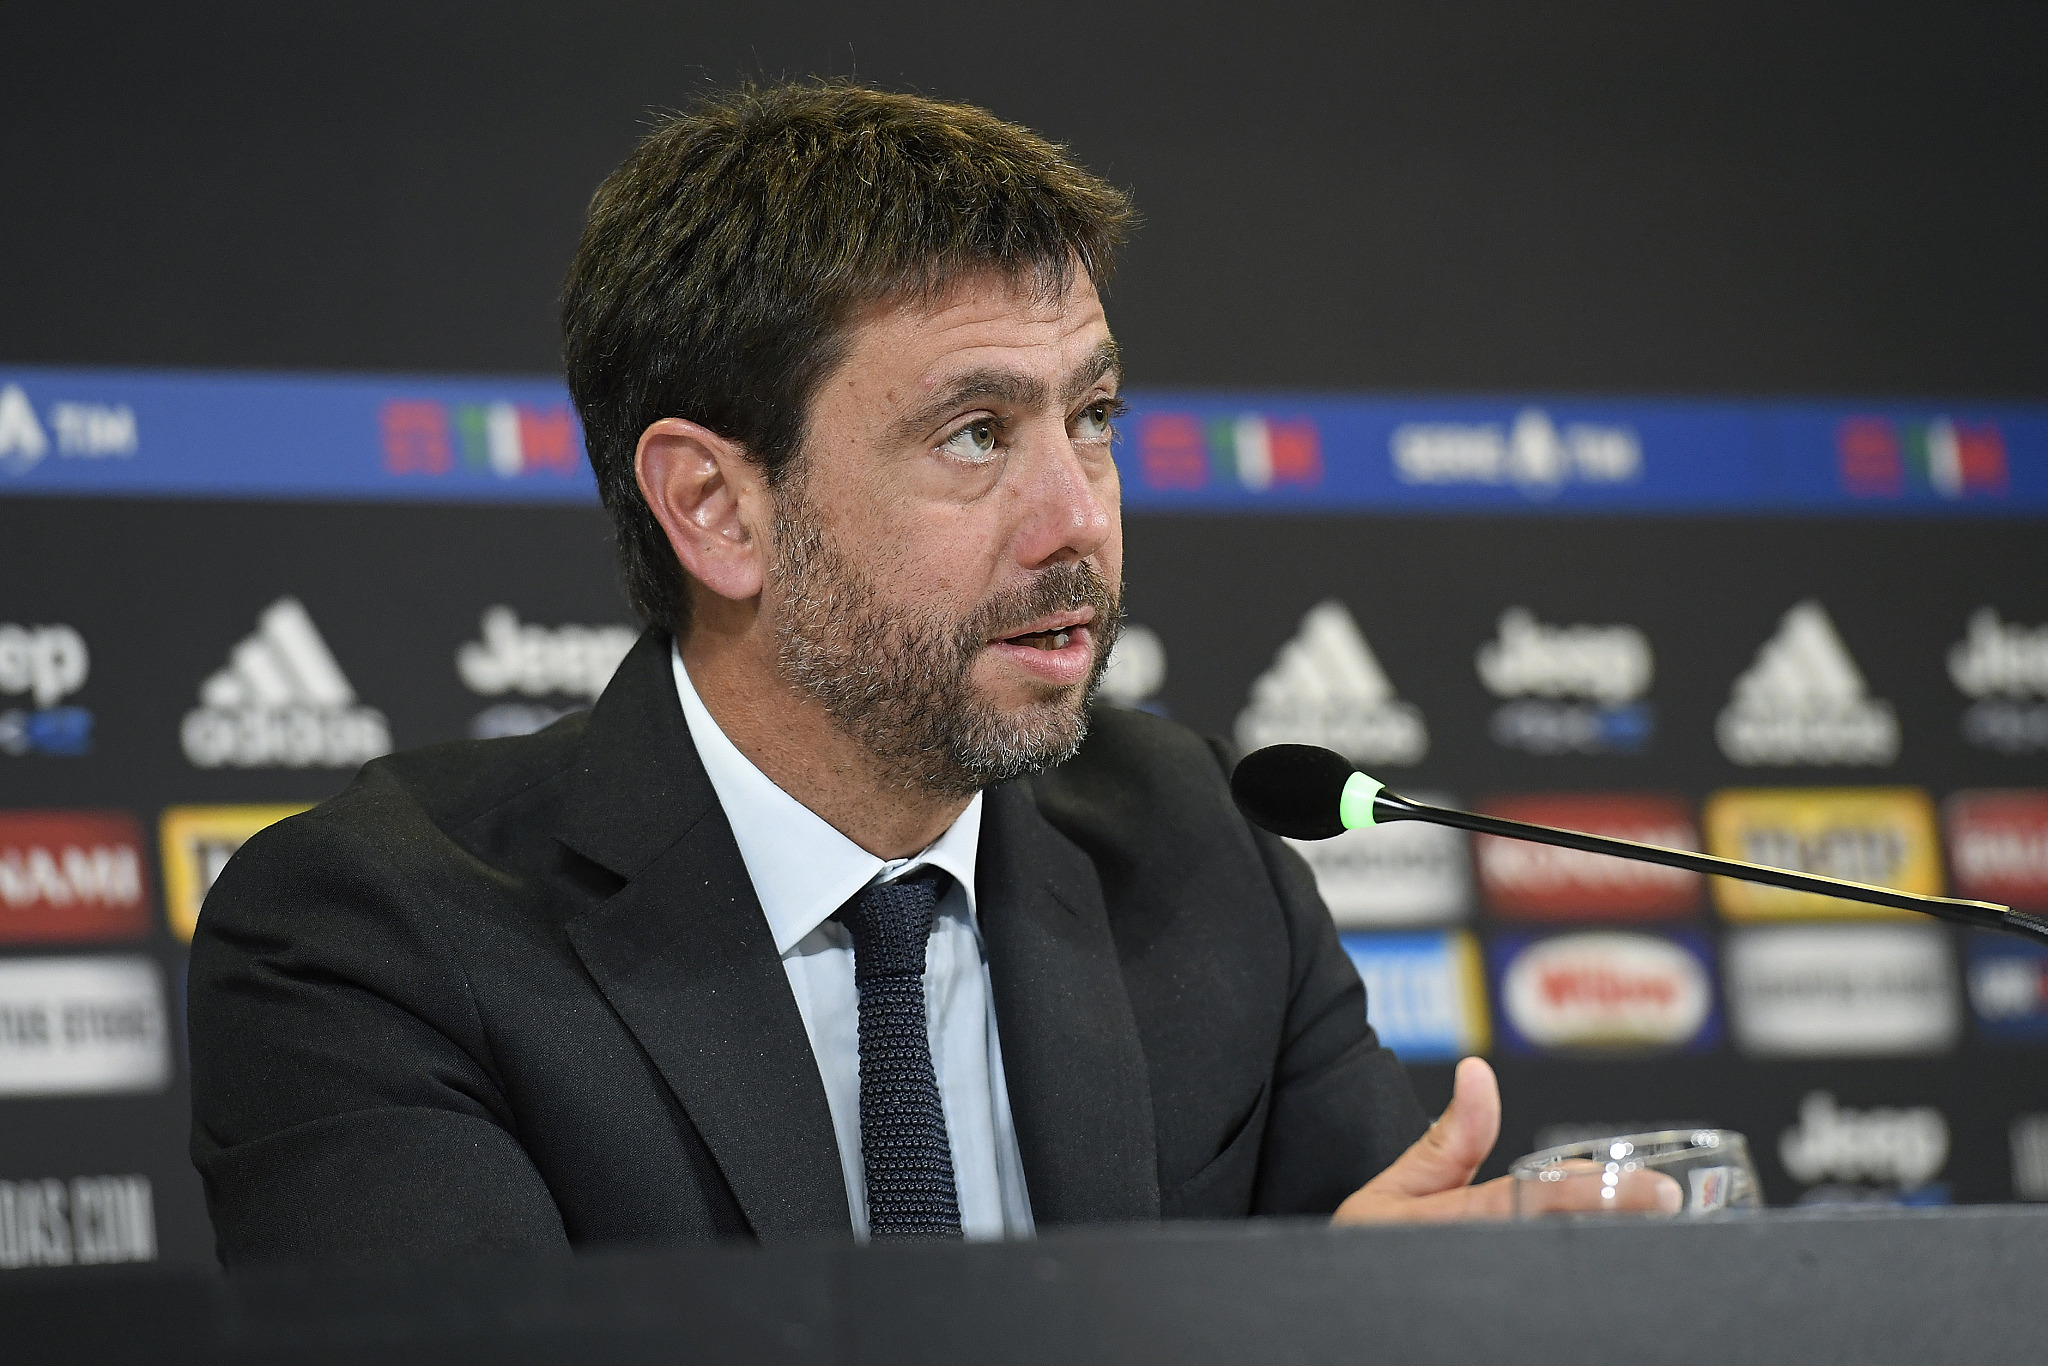  Andrea Agnelli, the president of Juventus F.C., speaks during a press conference about the expansion of the UEFA Champions League.